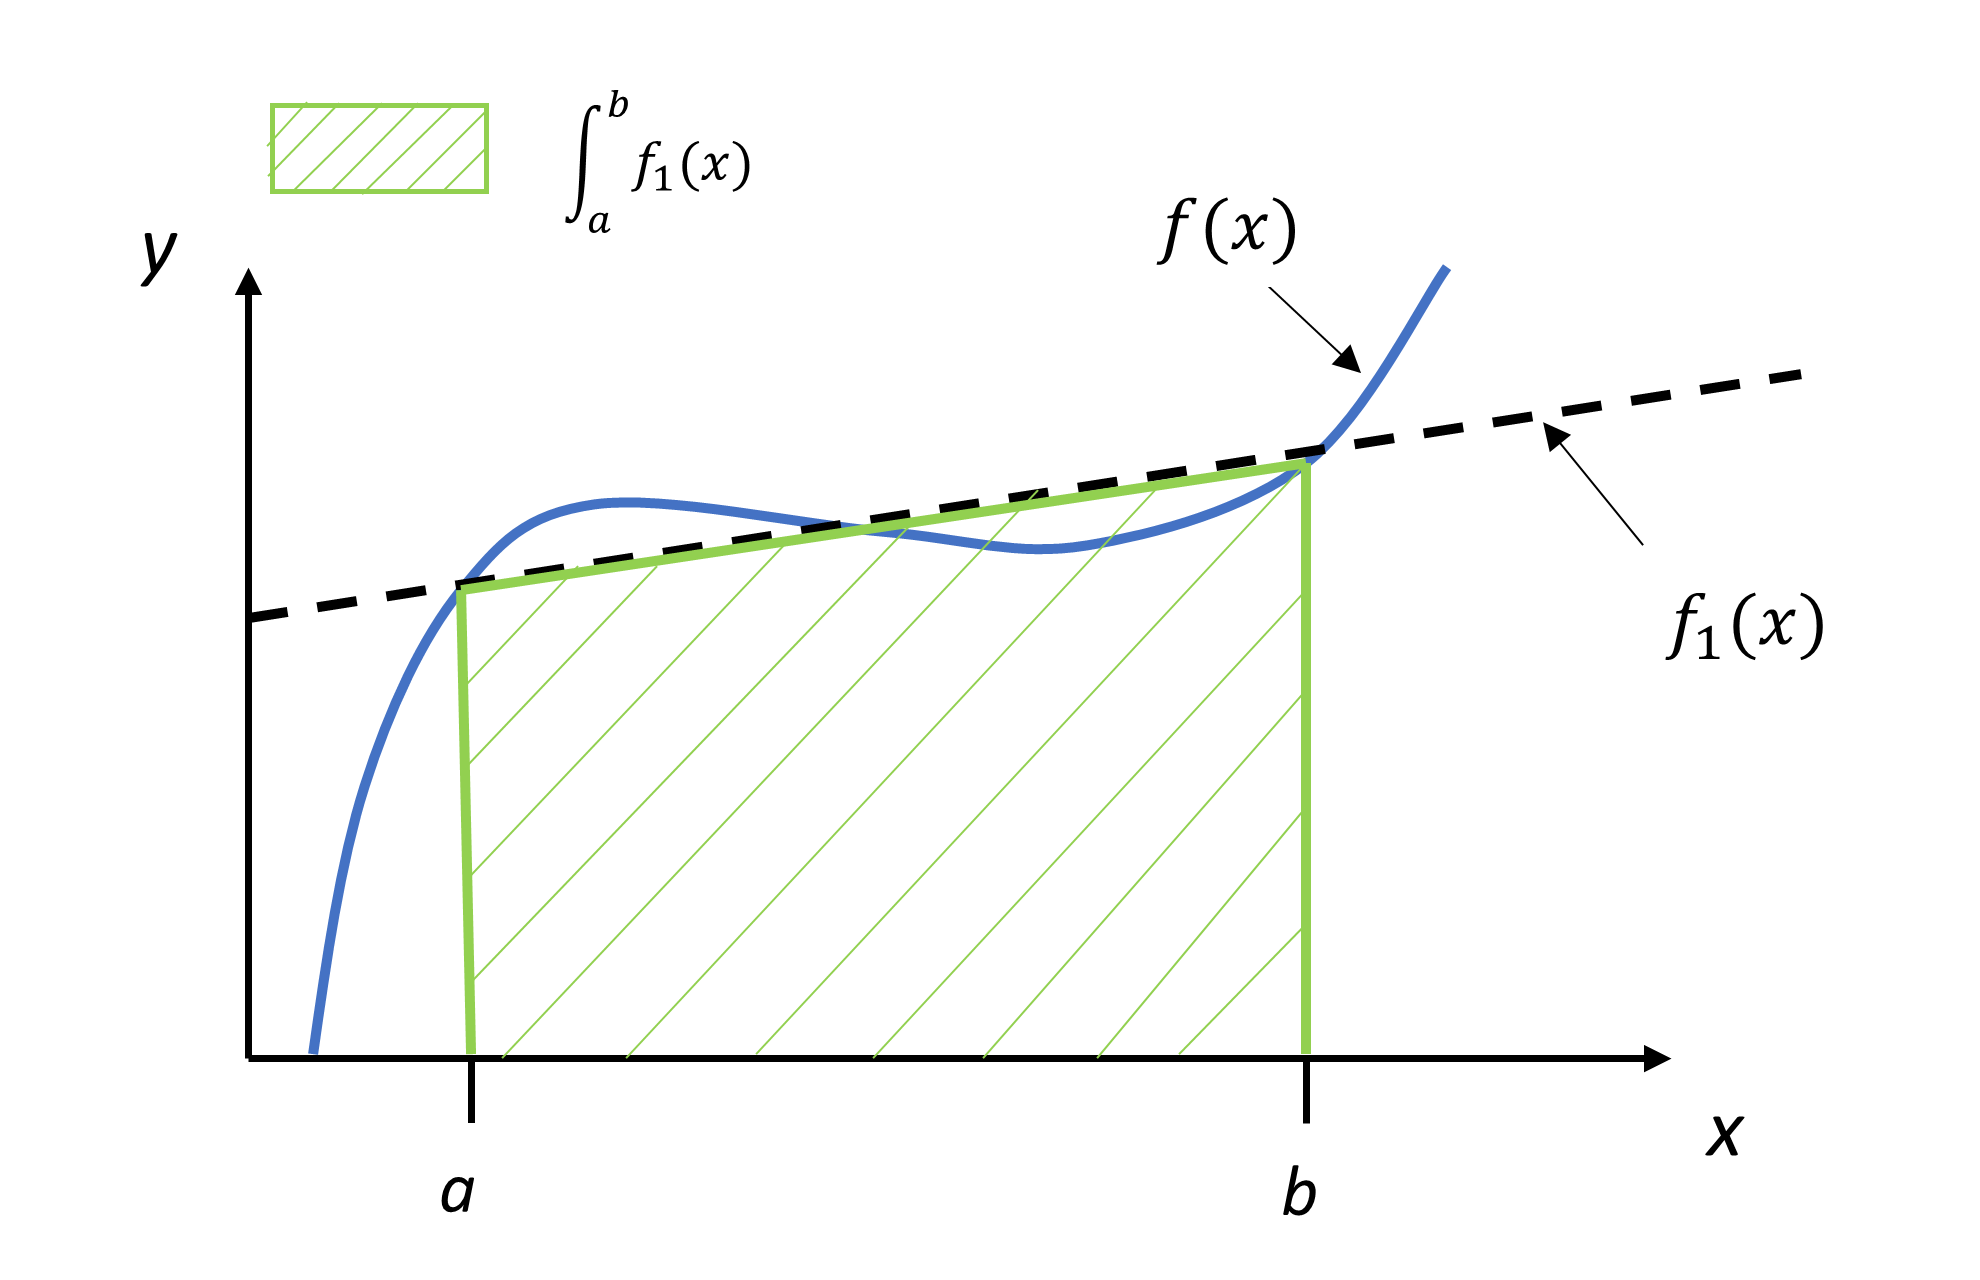 The value of the integral of a function between points a and b is approximated as the area of a trapezoidal region, bounded on the bottom by the x-axis, on the left and right sides by vertical lines at x=a and b, and on the top by an approximation of the function between the boundary points as a first-order polynomial.